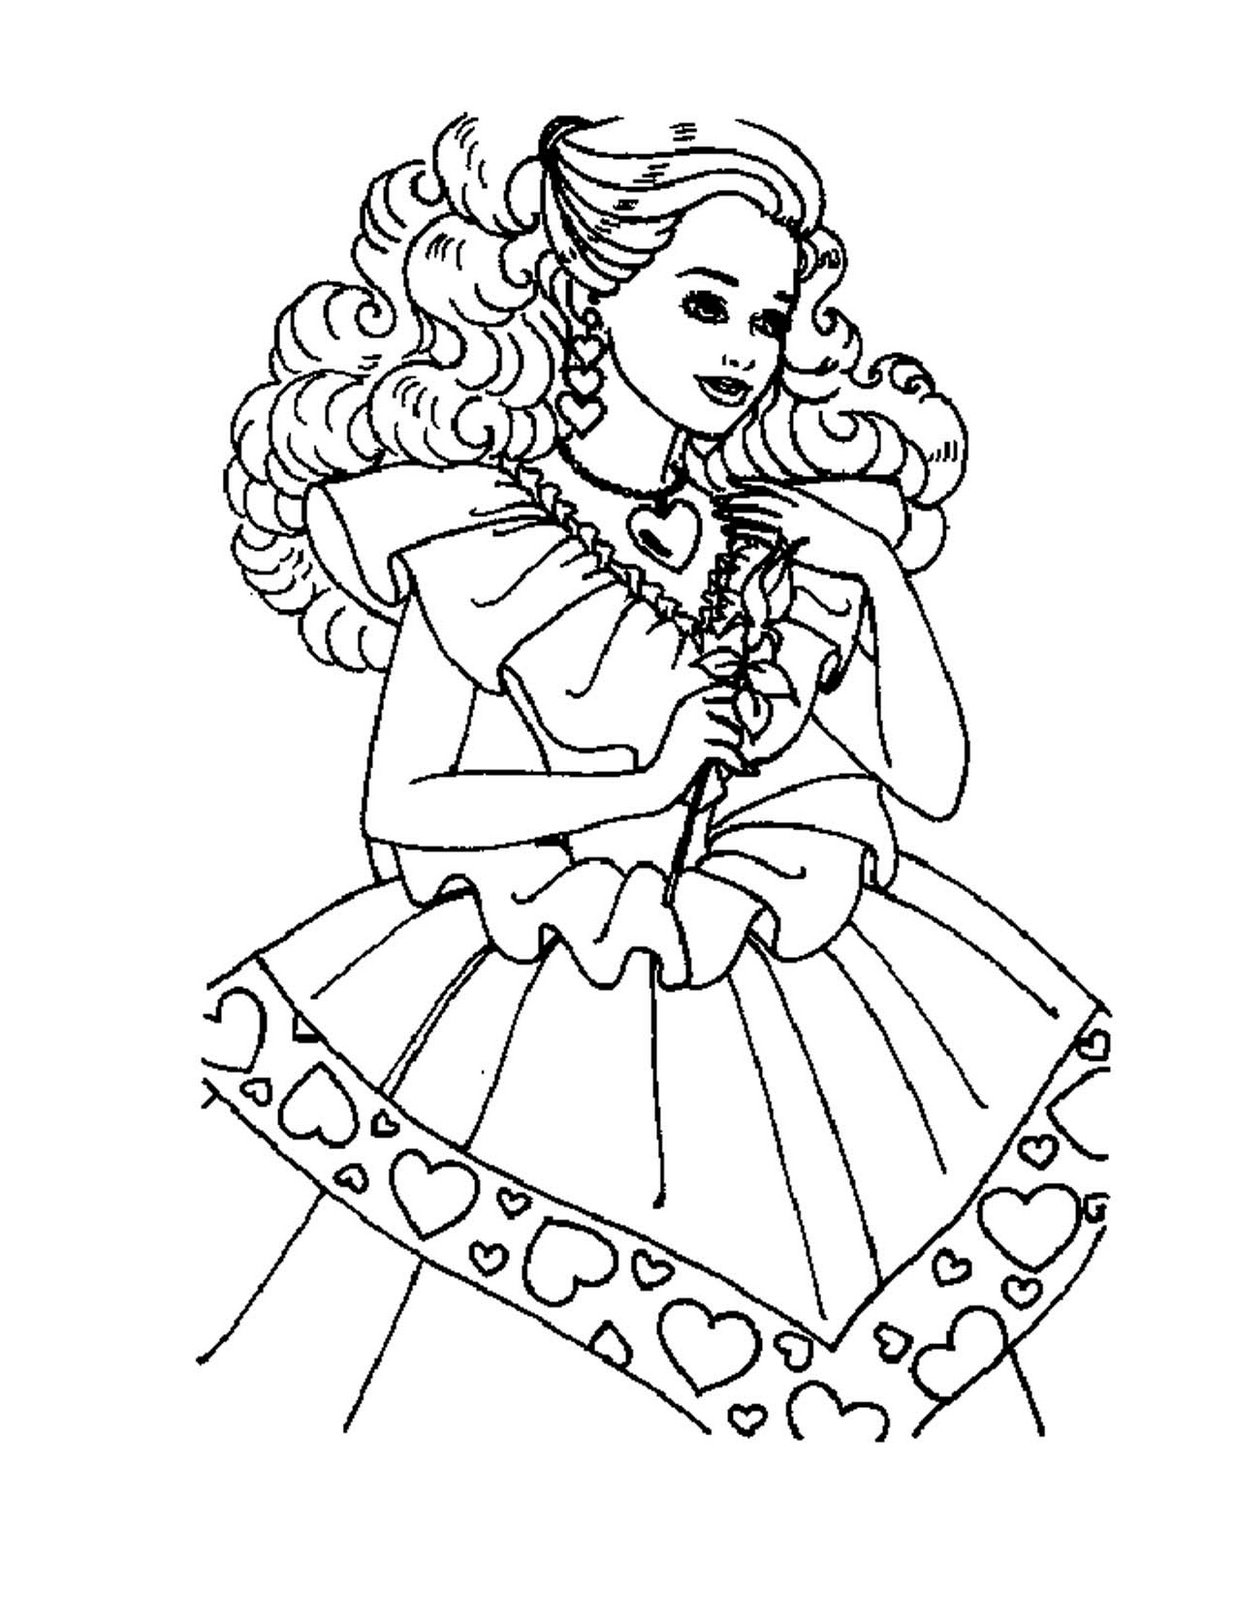 PRINCESS COLORING PAGES: BARBIE PRINCESS TO COLOR IN